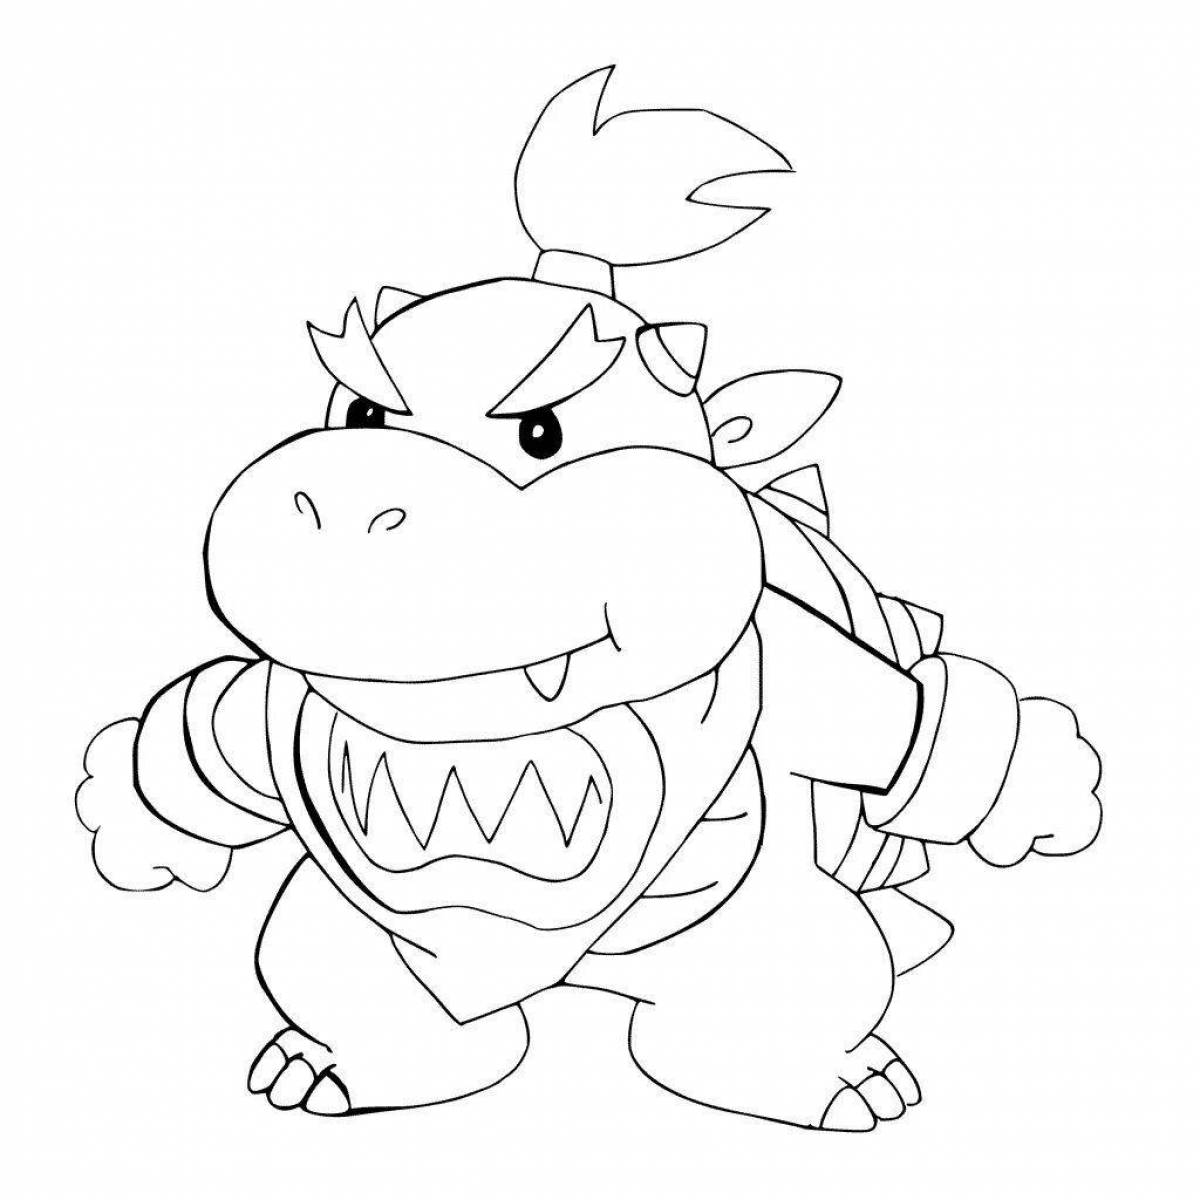 Bowser wild coloring